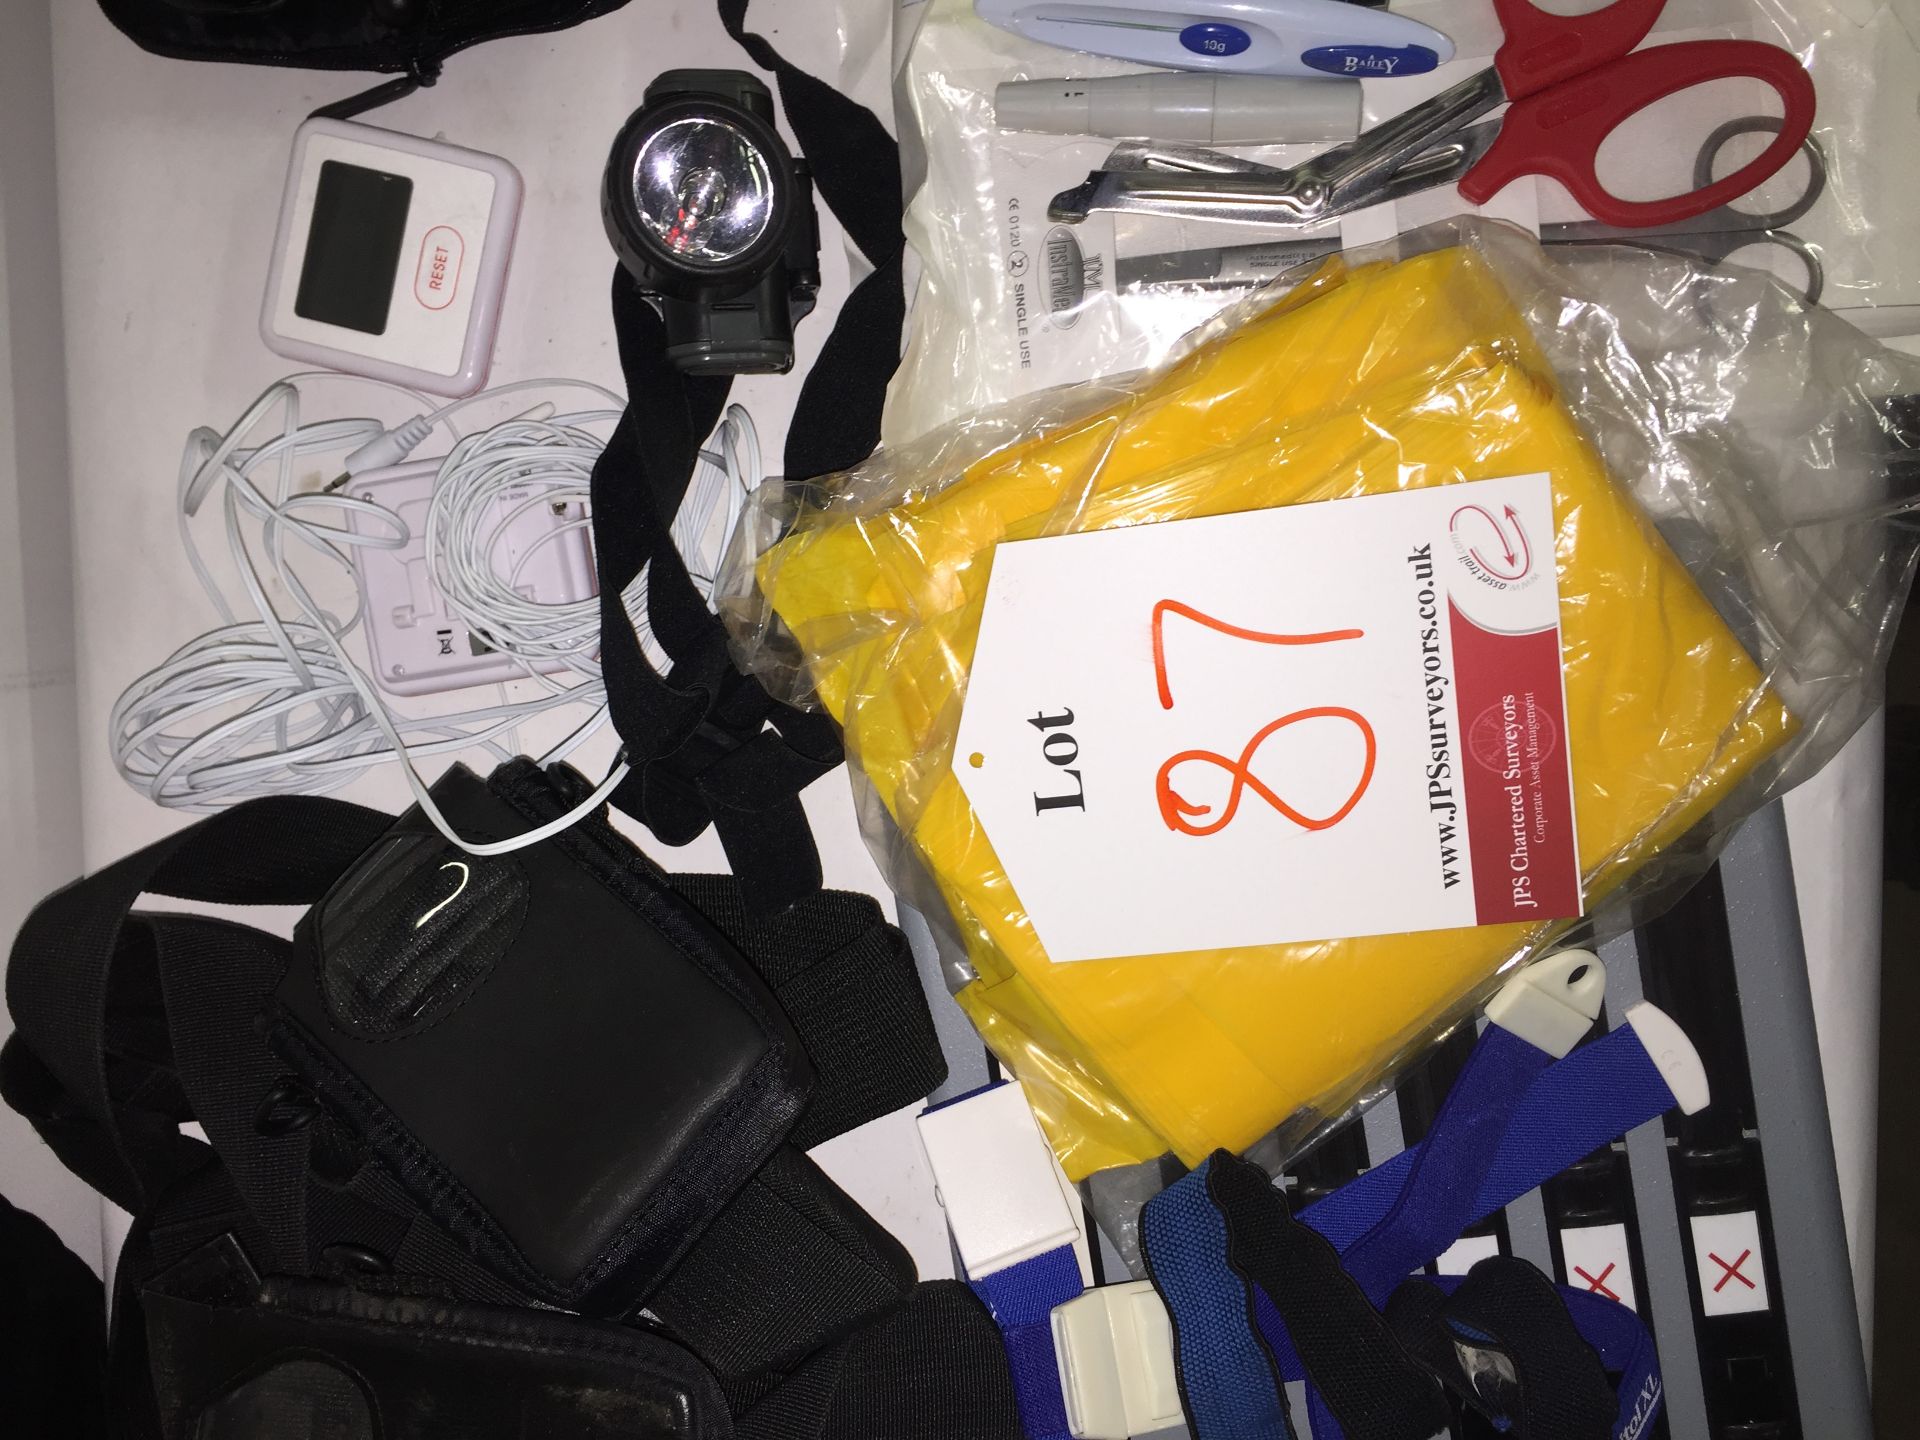 MIX LOT | Box of medical accessories including... - Image 3 of 5